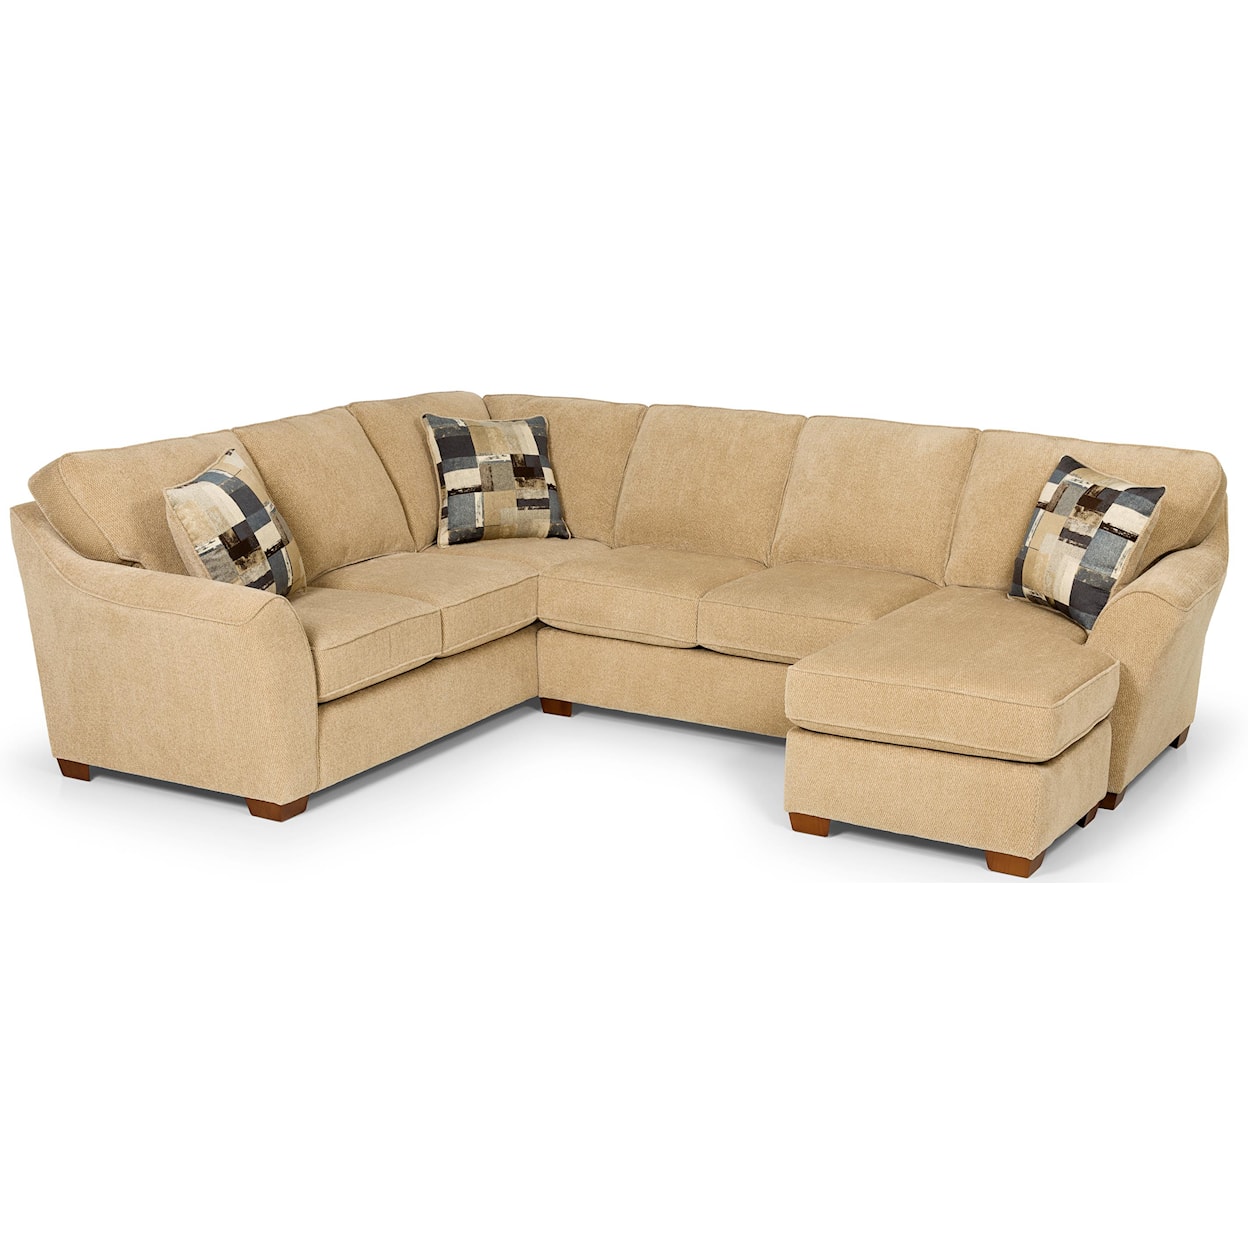 Stanton 112 L Shaped Sectional